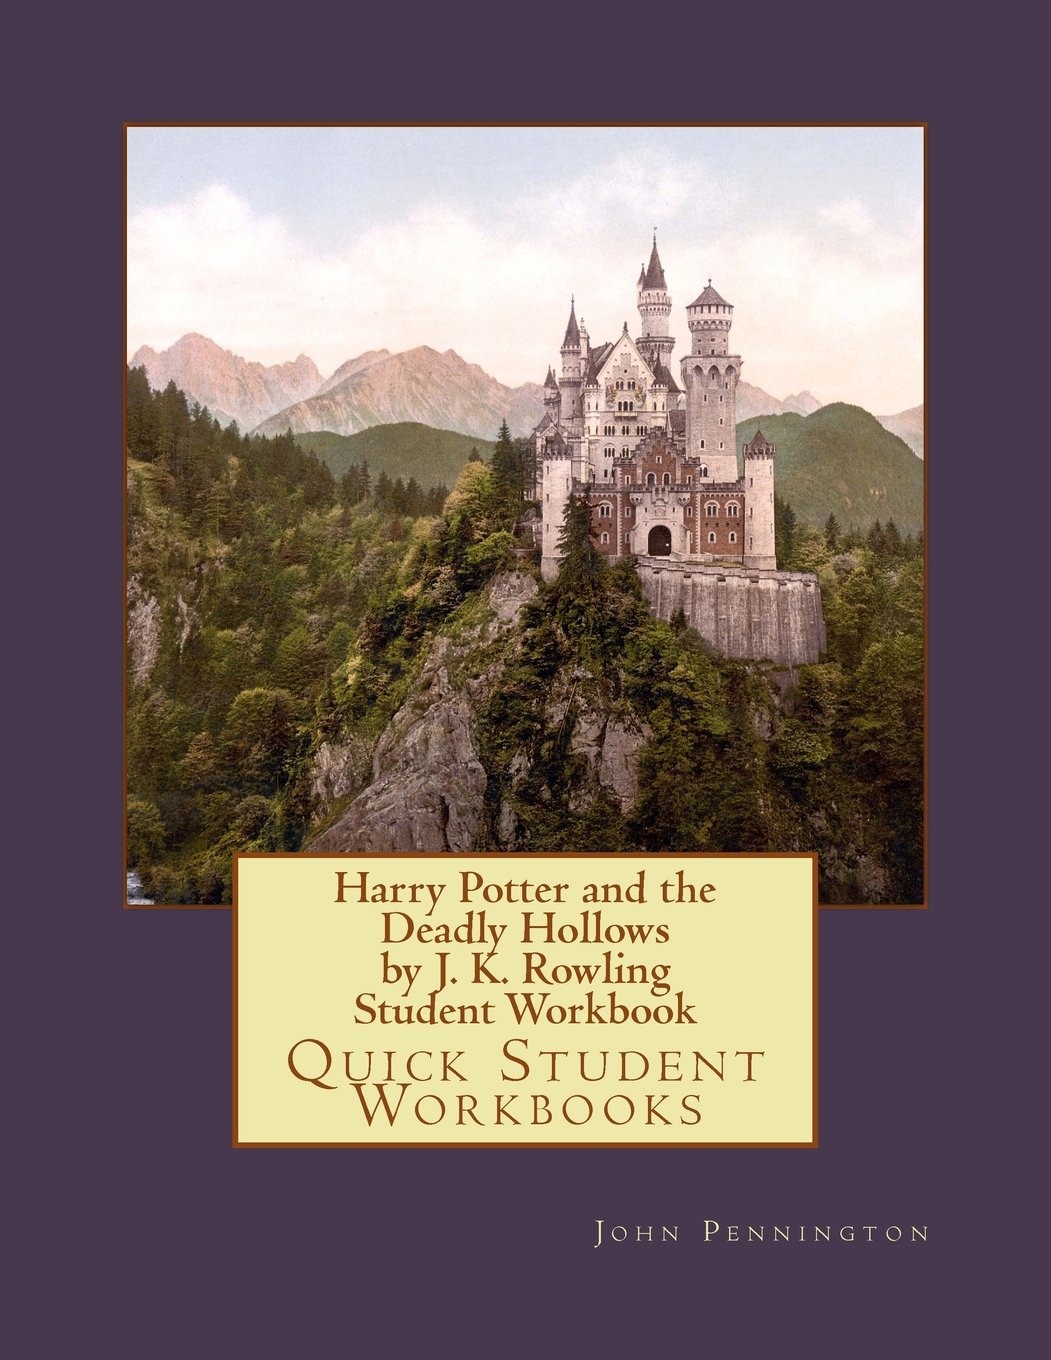 Harry Potter and the Deadly Hollows by J. K. Rowling Student Workbook: Quick Student Workbooks